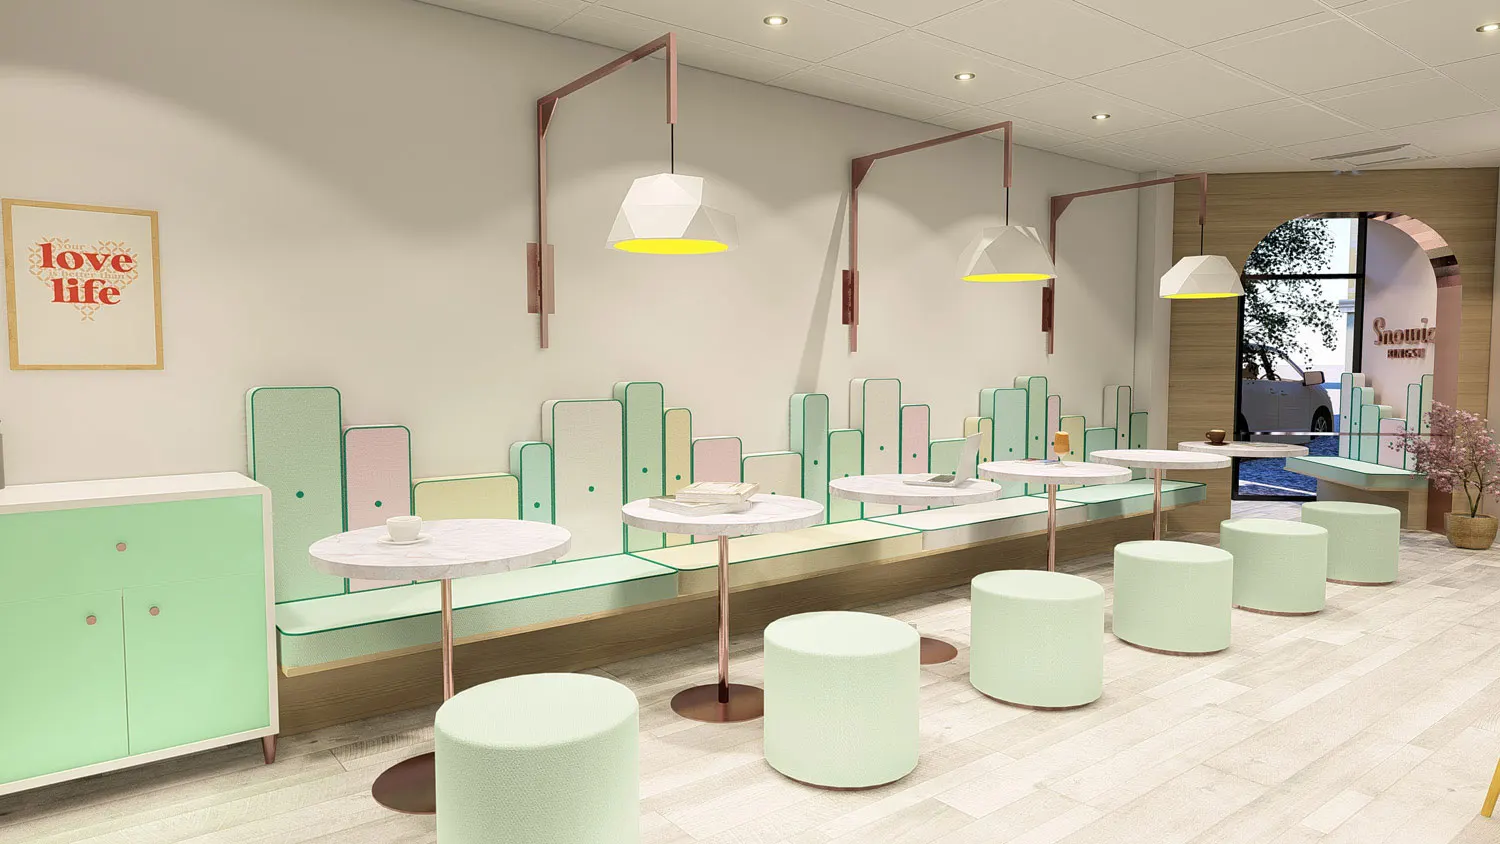 Interior design project for Snowies. Designed 3D rendering